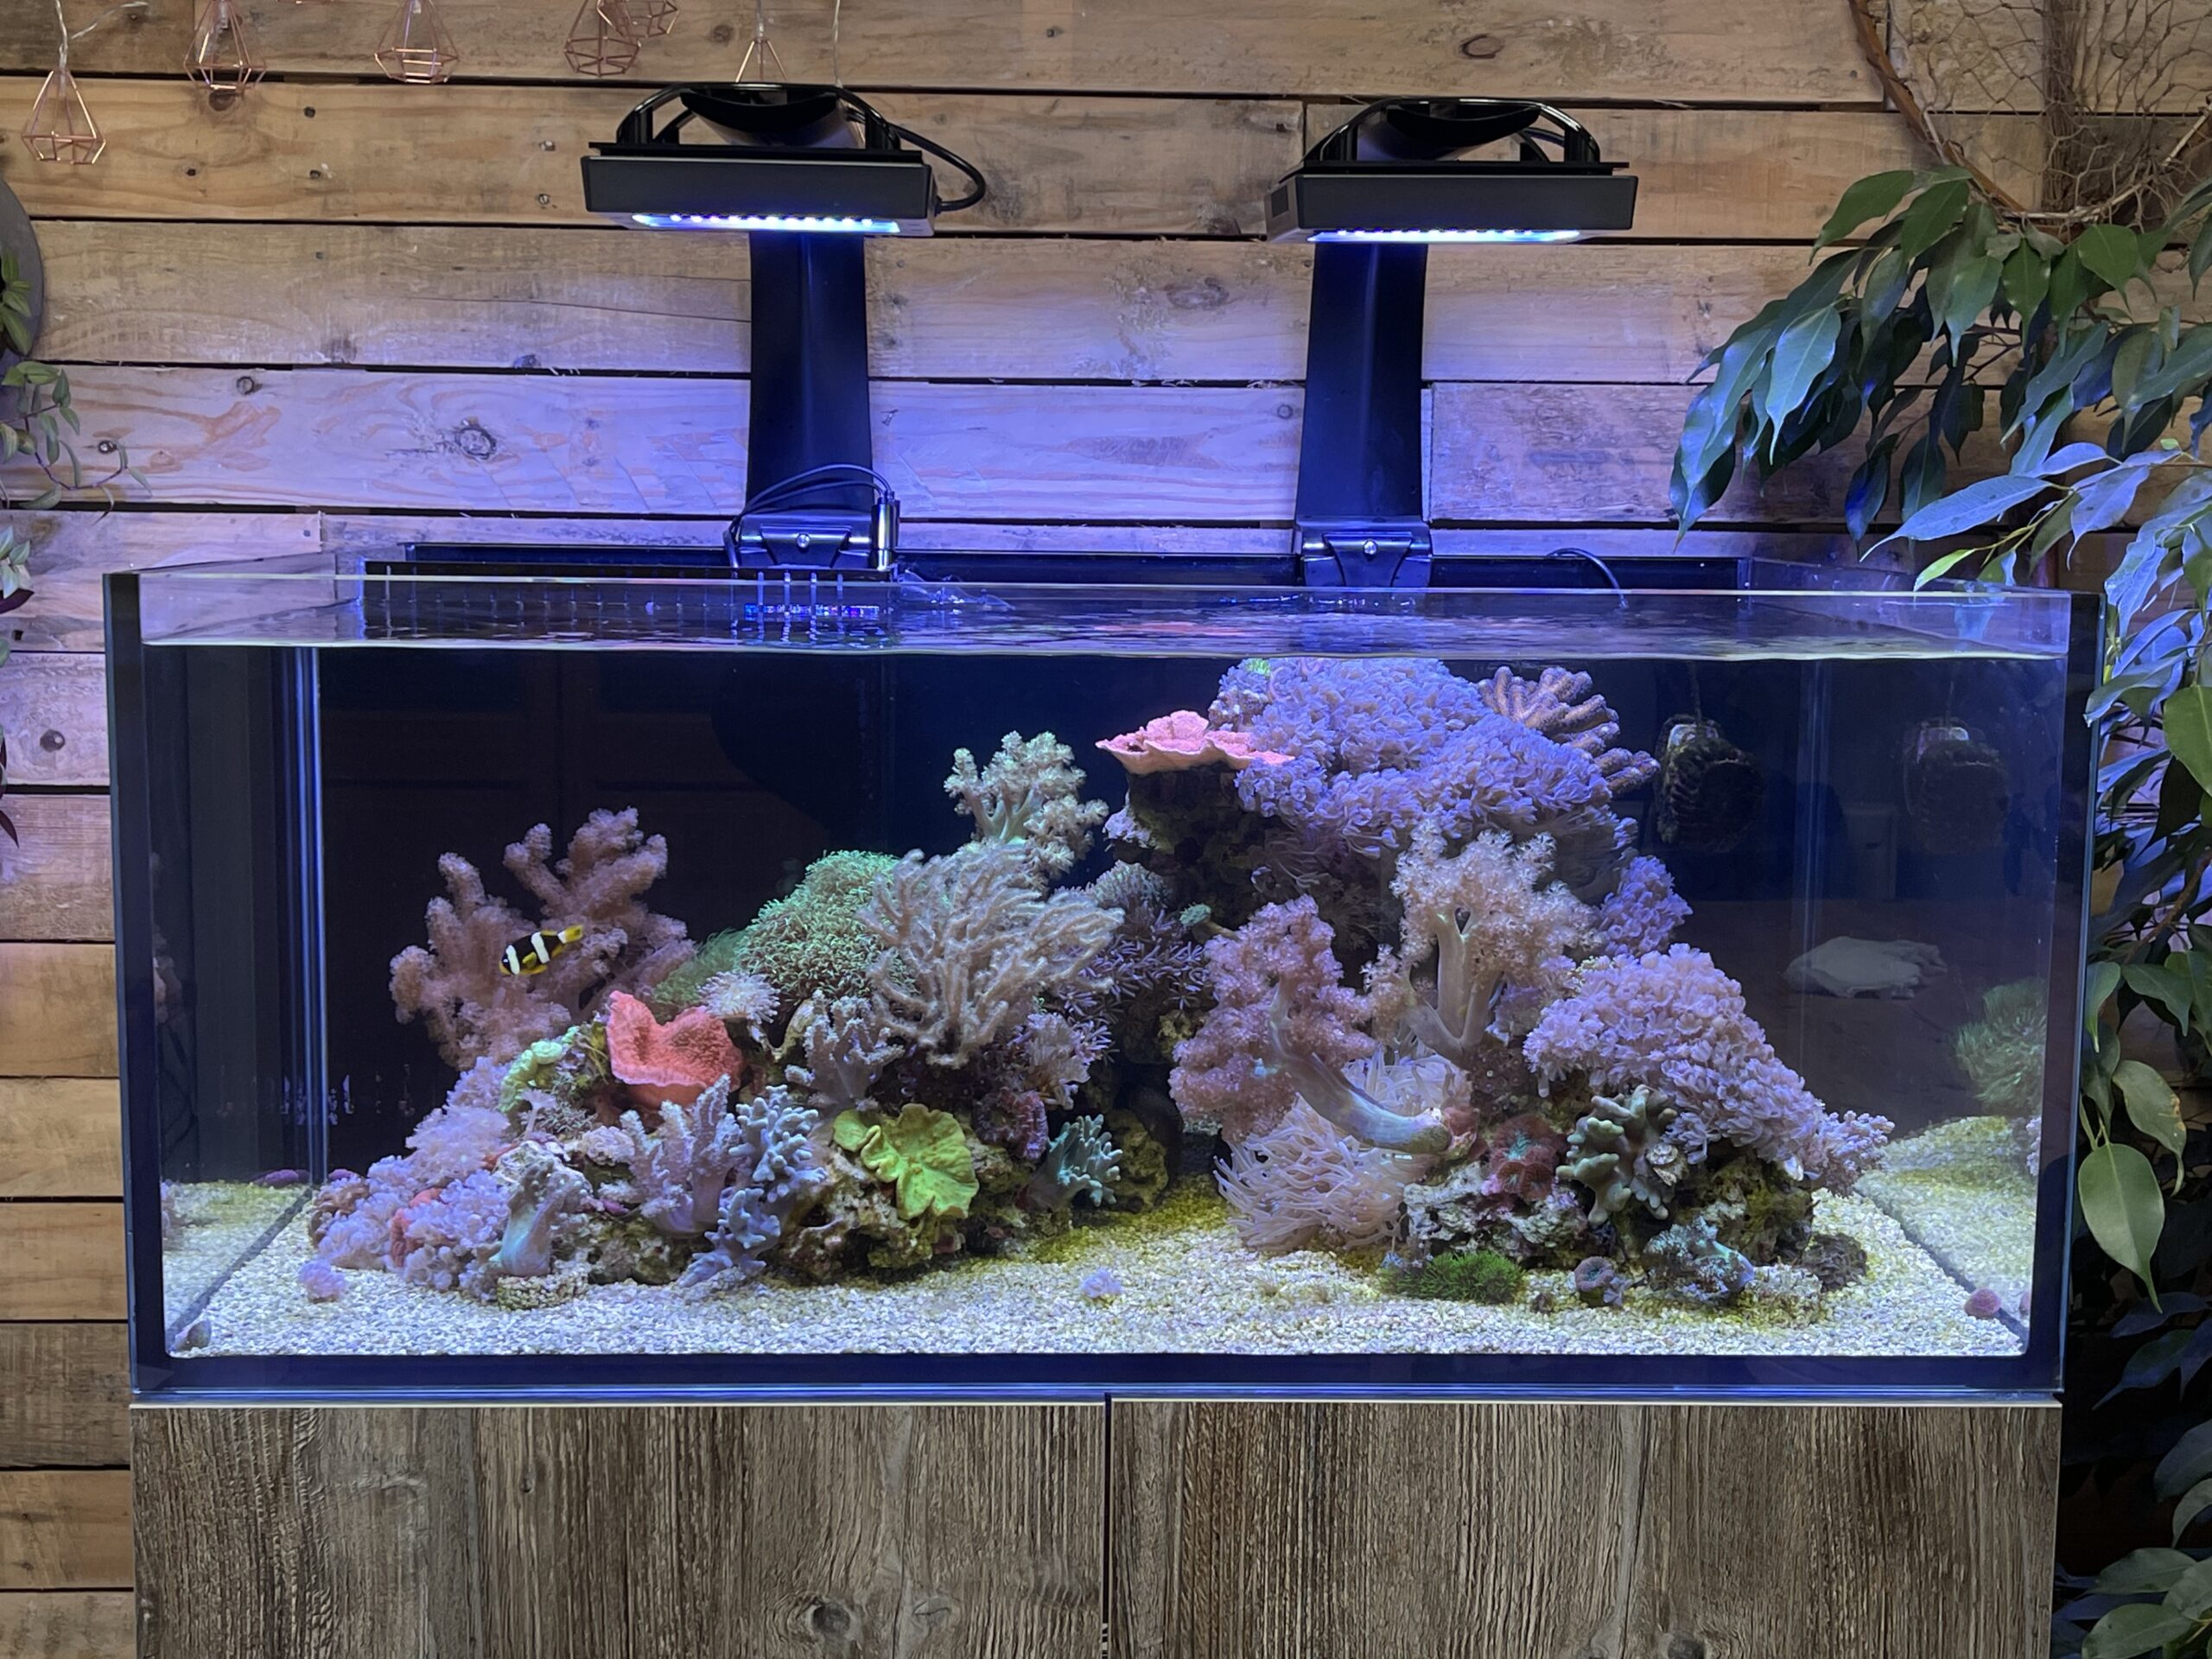 North American Native Fishtanks — Looking for thoughts/advice! I'm working  on a